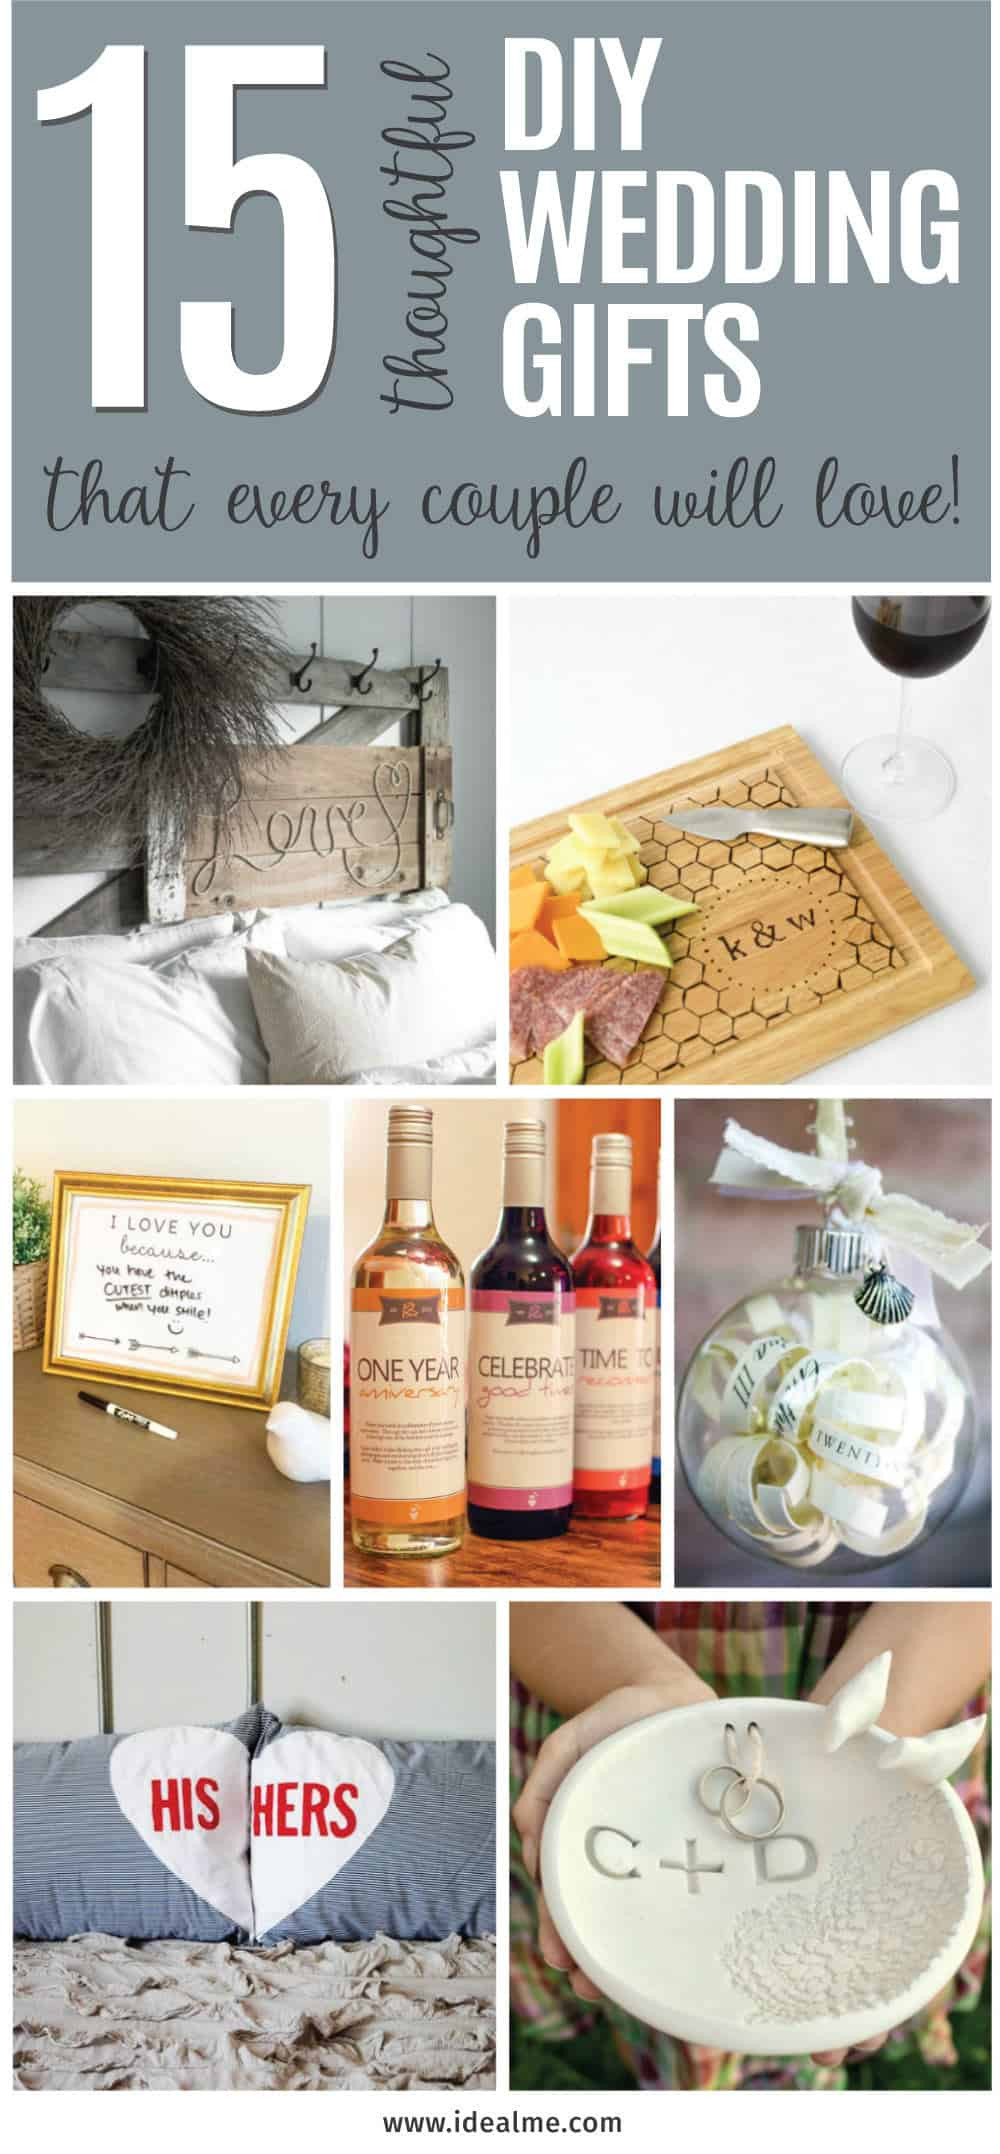 Diy Wedding Gift Ideas
 15 Thoughtful DIY Wedding Gifts that Every Couple Will